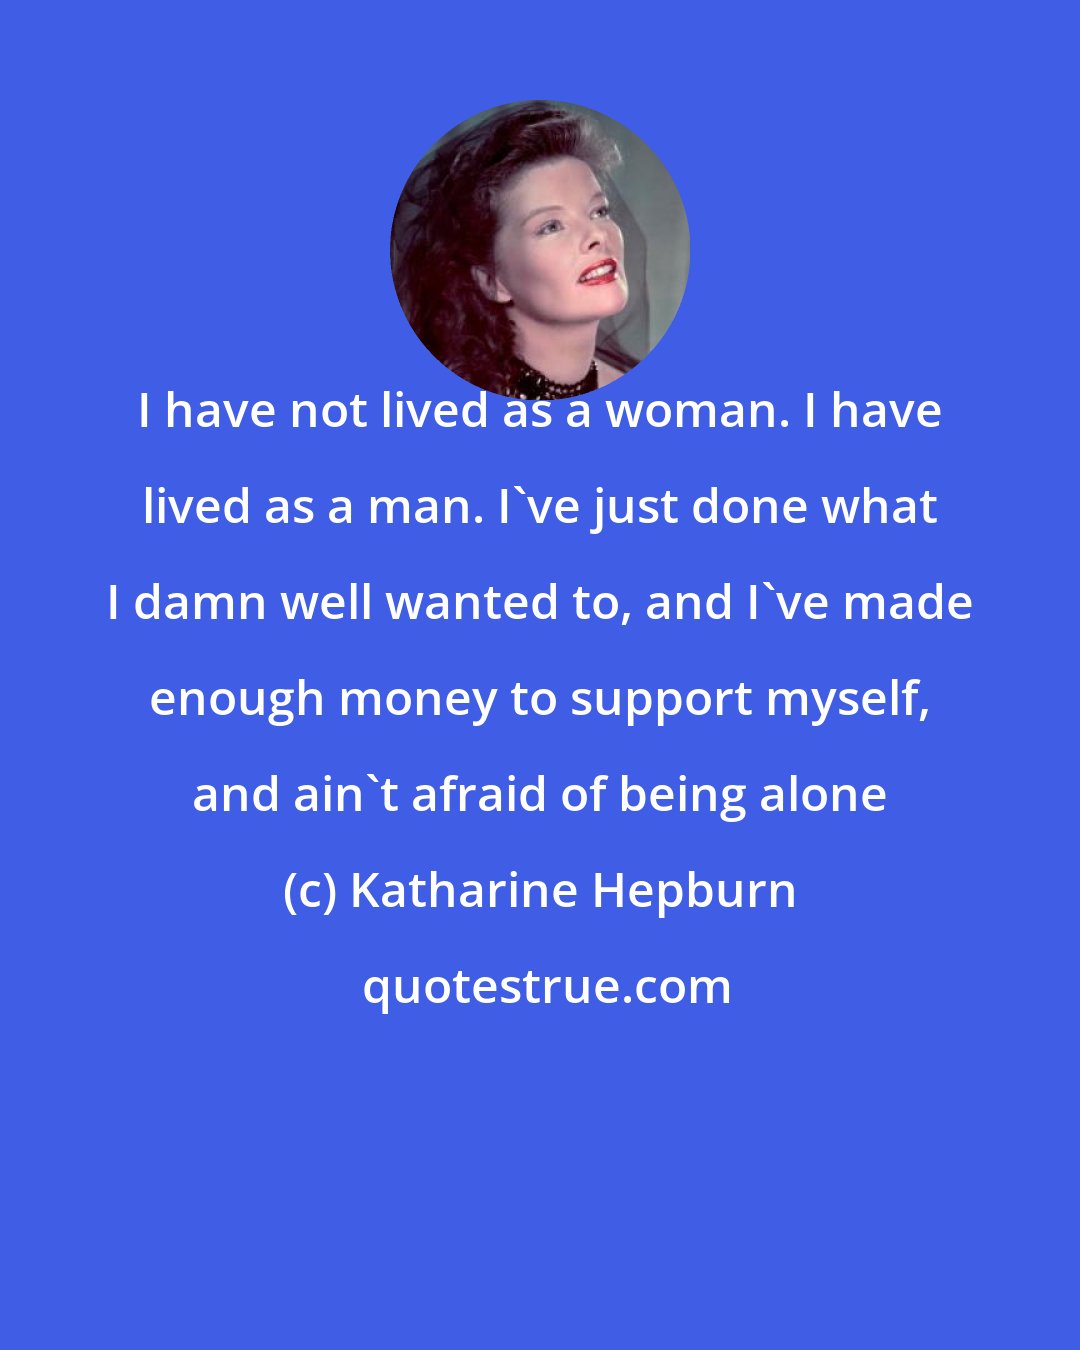 Katharine Hepburn: I have not lived as a woman. I have lived as a man. I've just done what I damn well wanted to, and I've made enough money to support myself, and ain't afraid of being alone